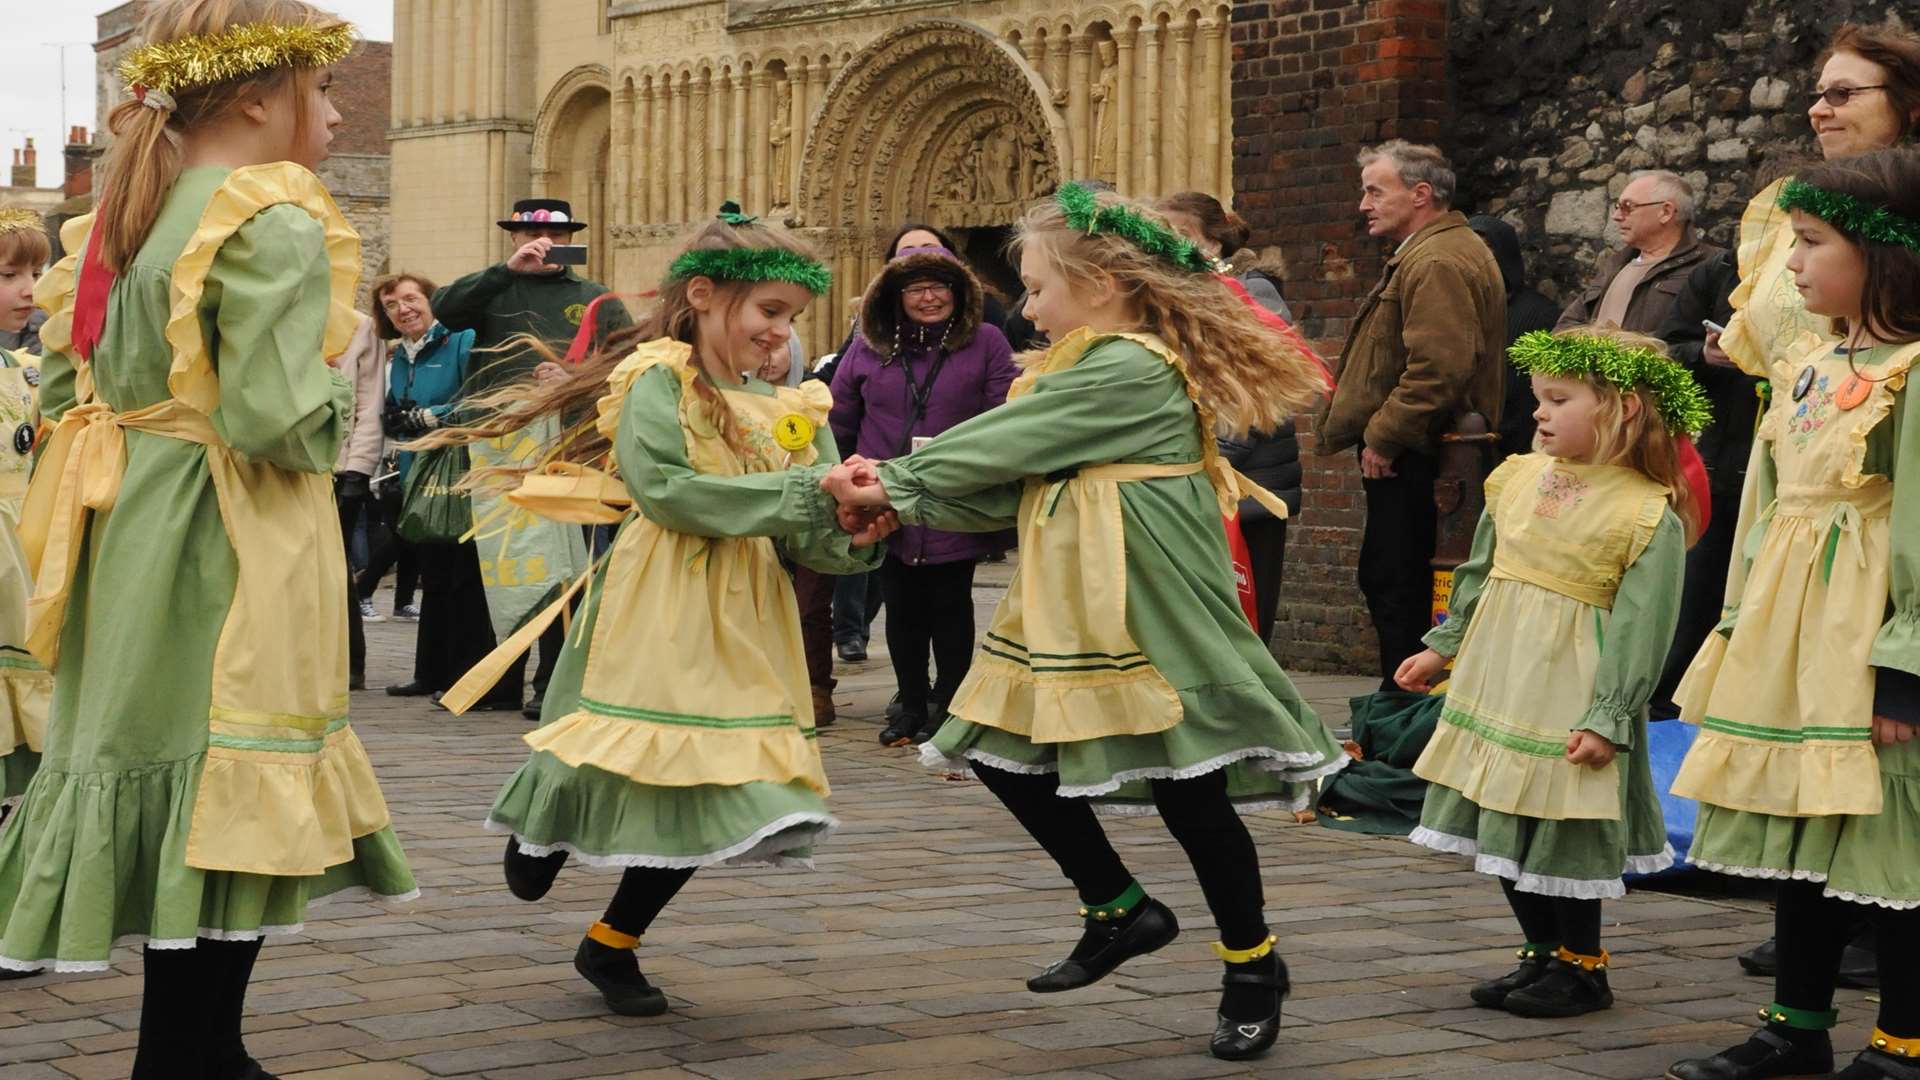 The streets were full of Dickensian-era dancers and entertainers.